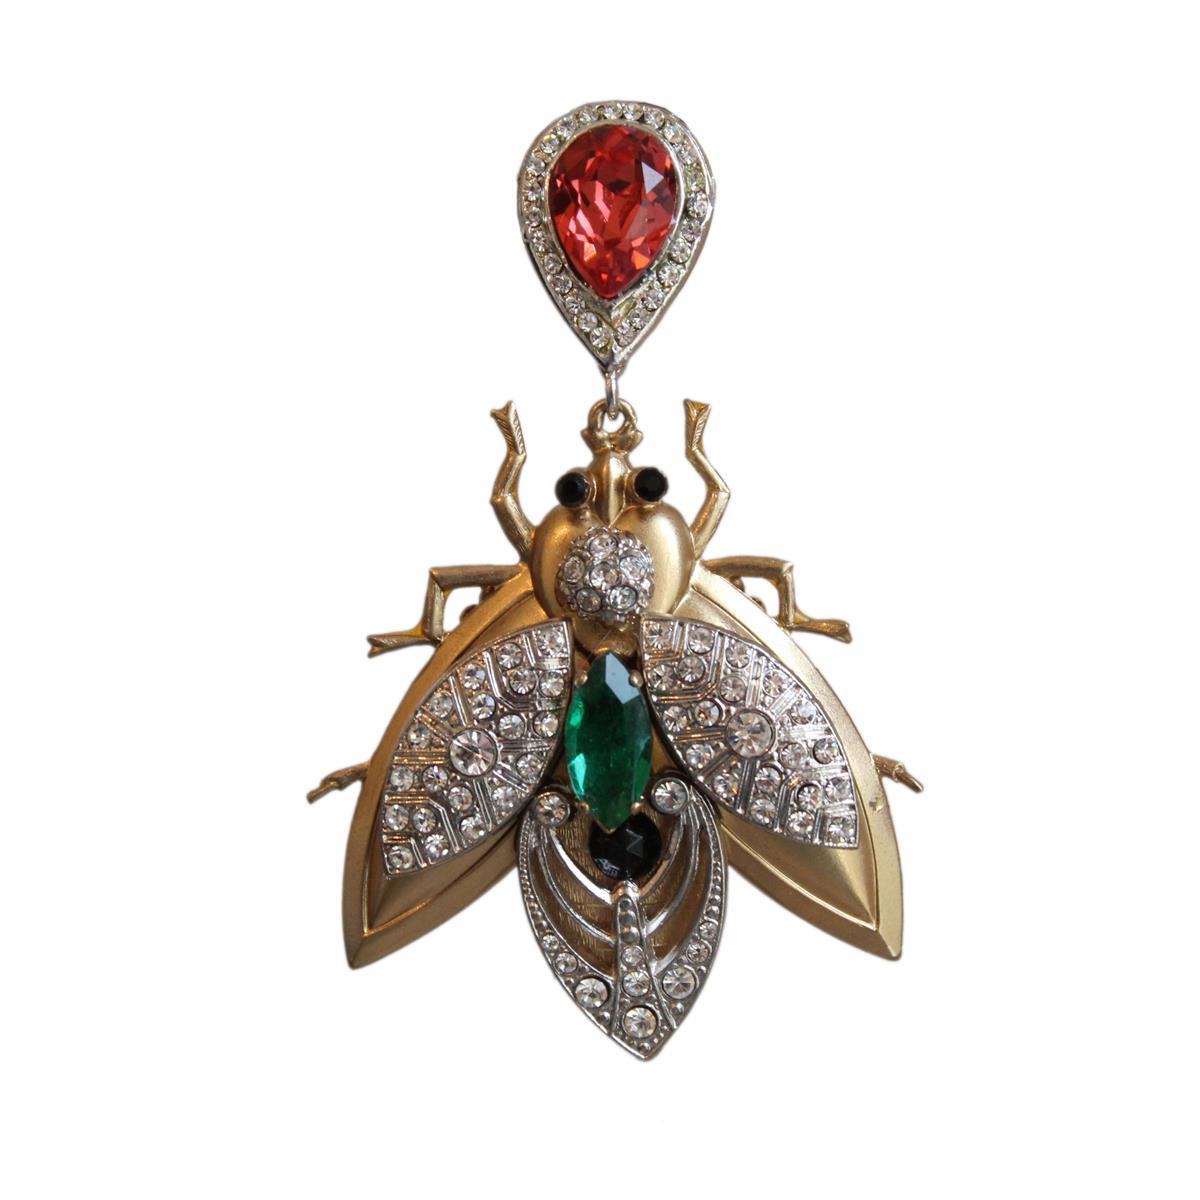 Funni and unique Carlo Zini pendants
One of the world's best bijoux designers
New summer 2019 colection !
Non allergenic rhodium
Opaque Gold dipped
Bees theme
Amazing creation of swarovski crystals, rhinestones and resins
Clip on closure, pierced on